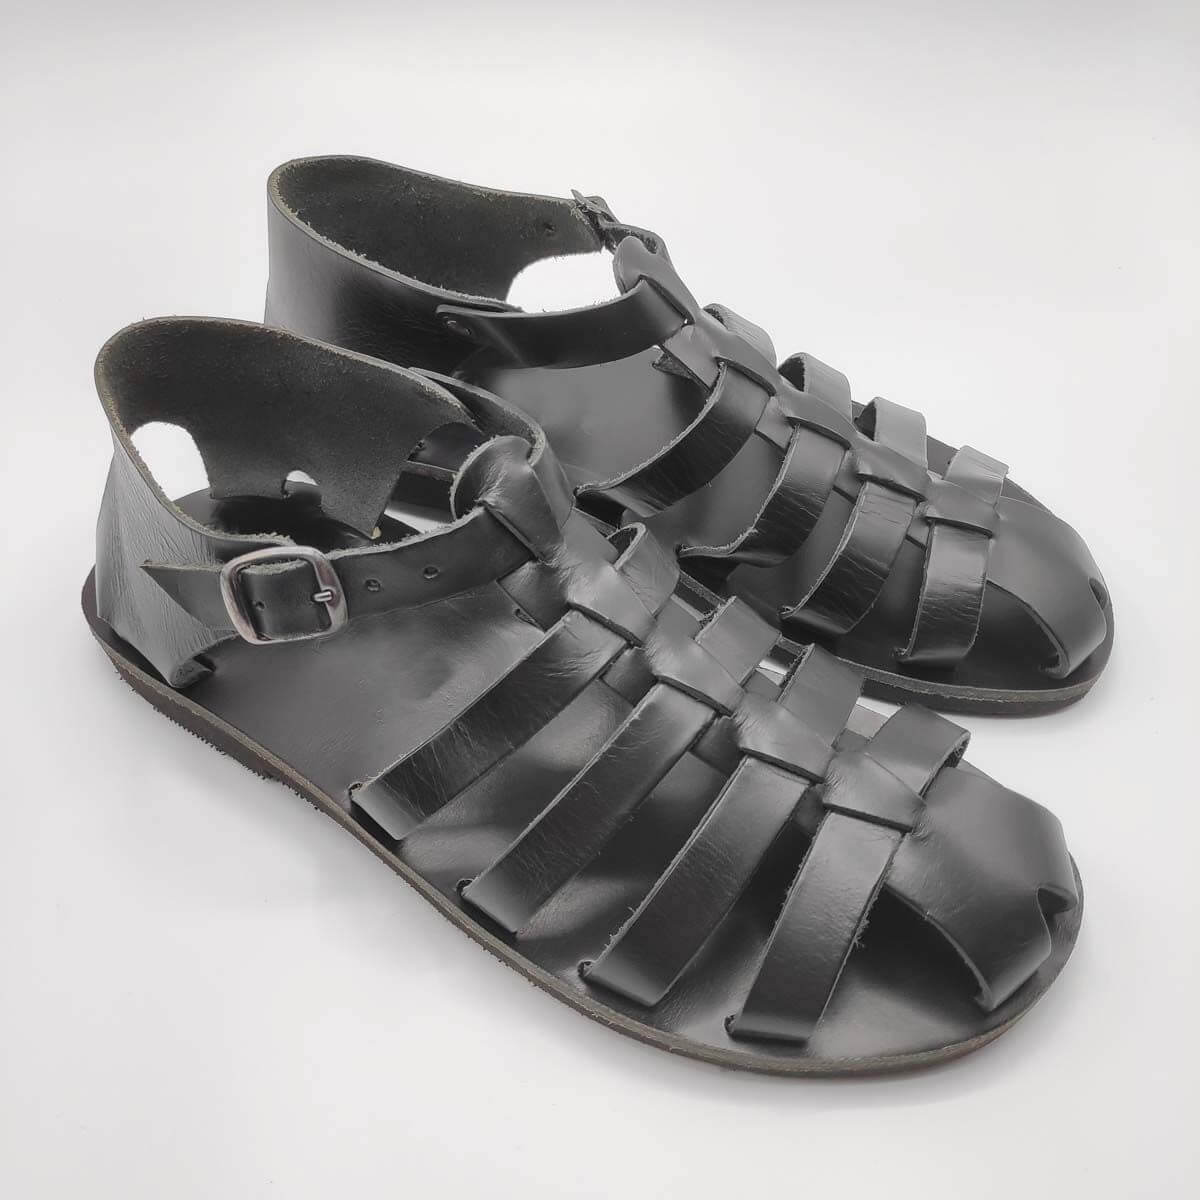 Modern Fantasy Mens Leather Sandals Closed Toe Casual Fisherman Beach Slippers 